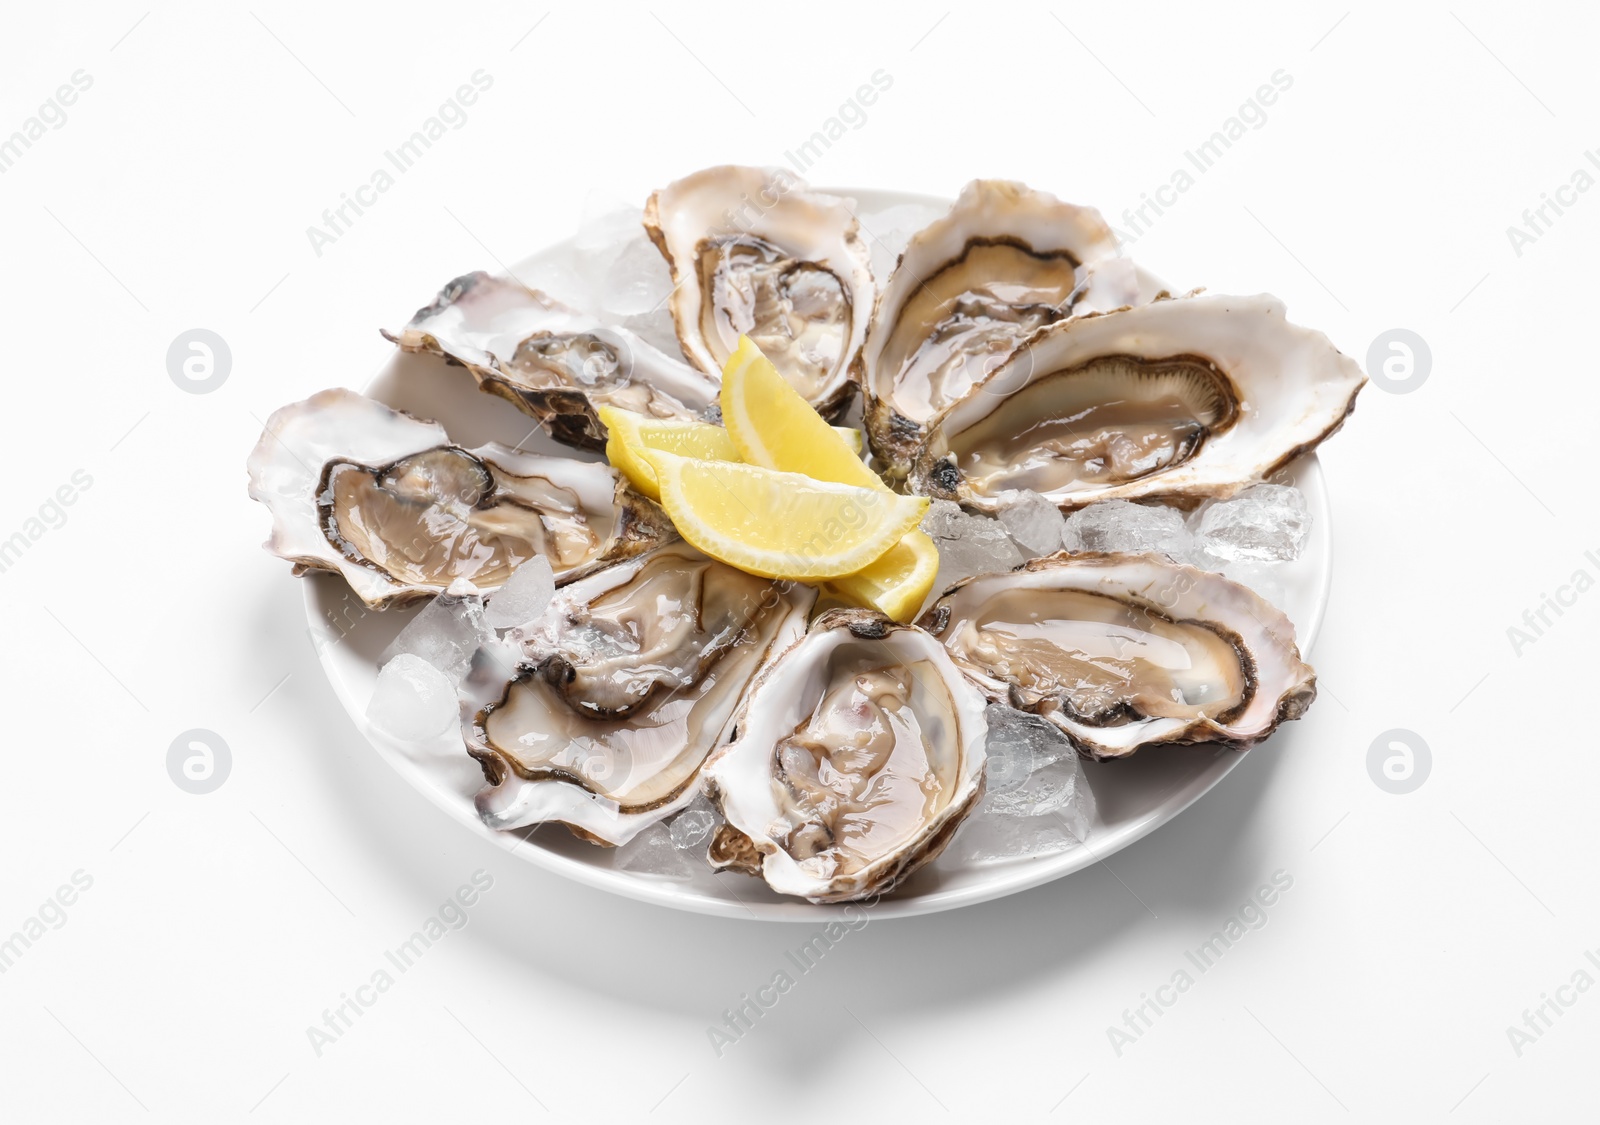 Photo of Delicious fresh oysters with lemon slices isolated on white